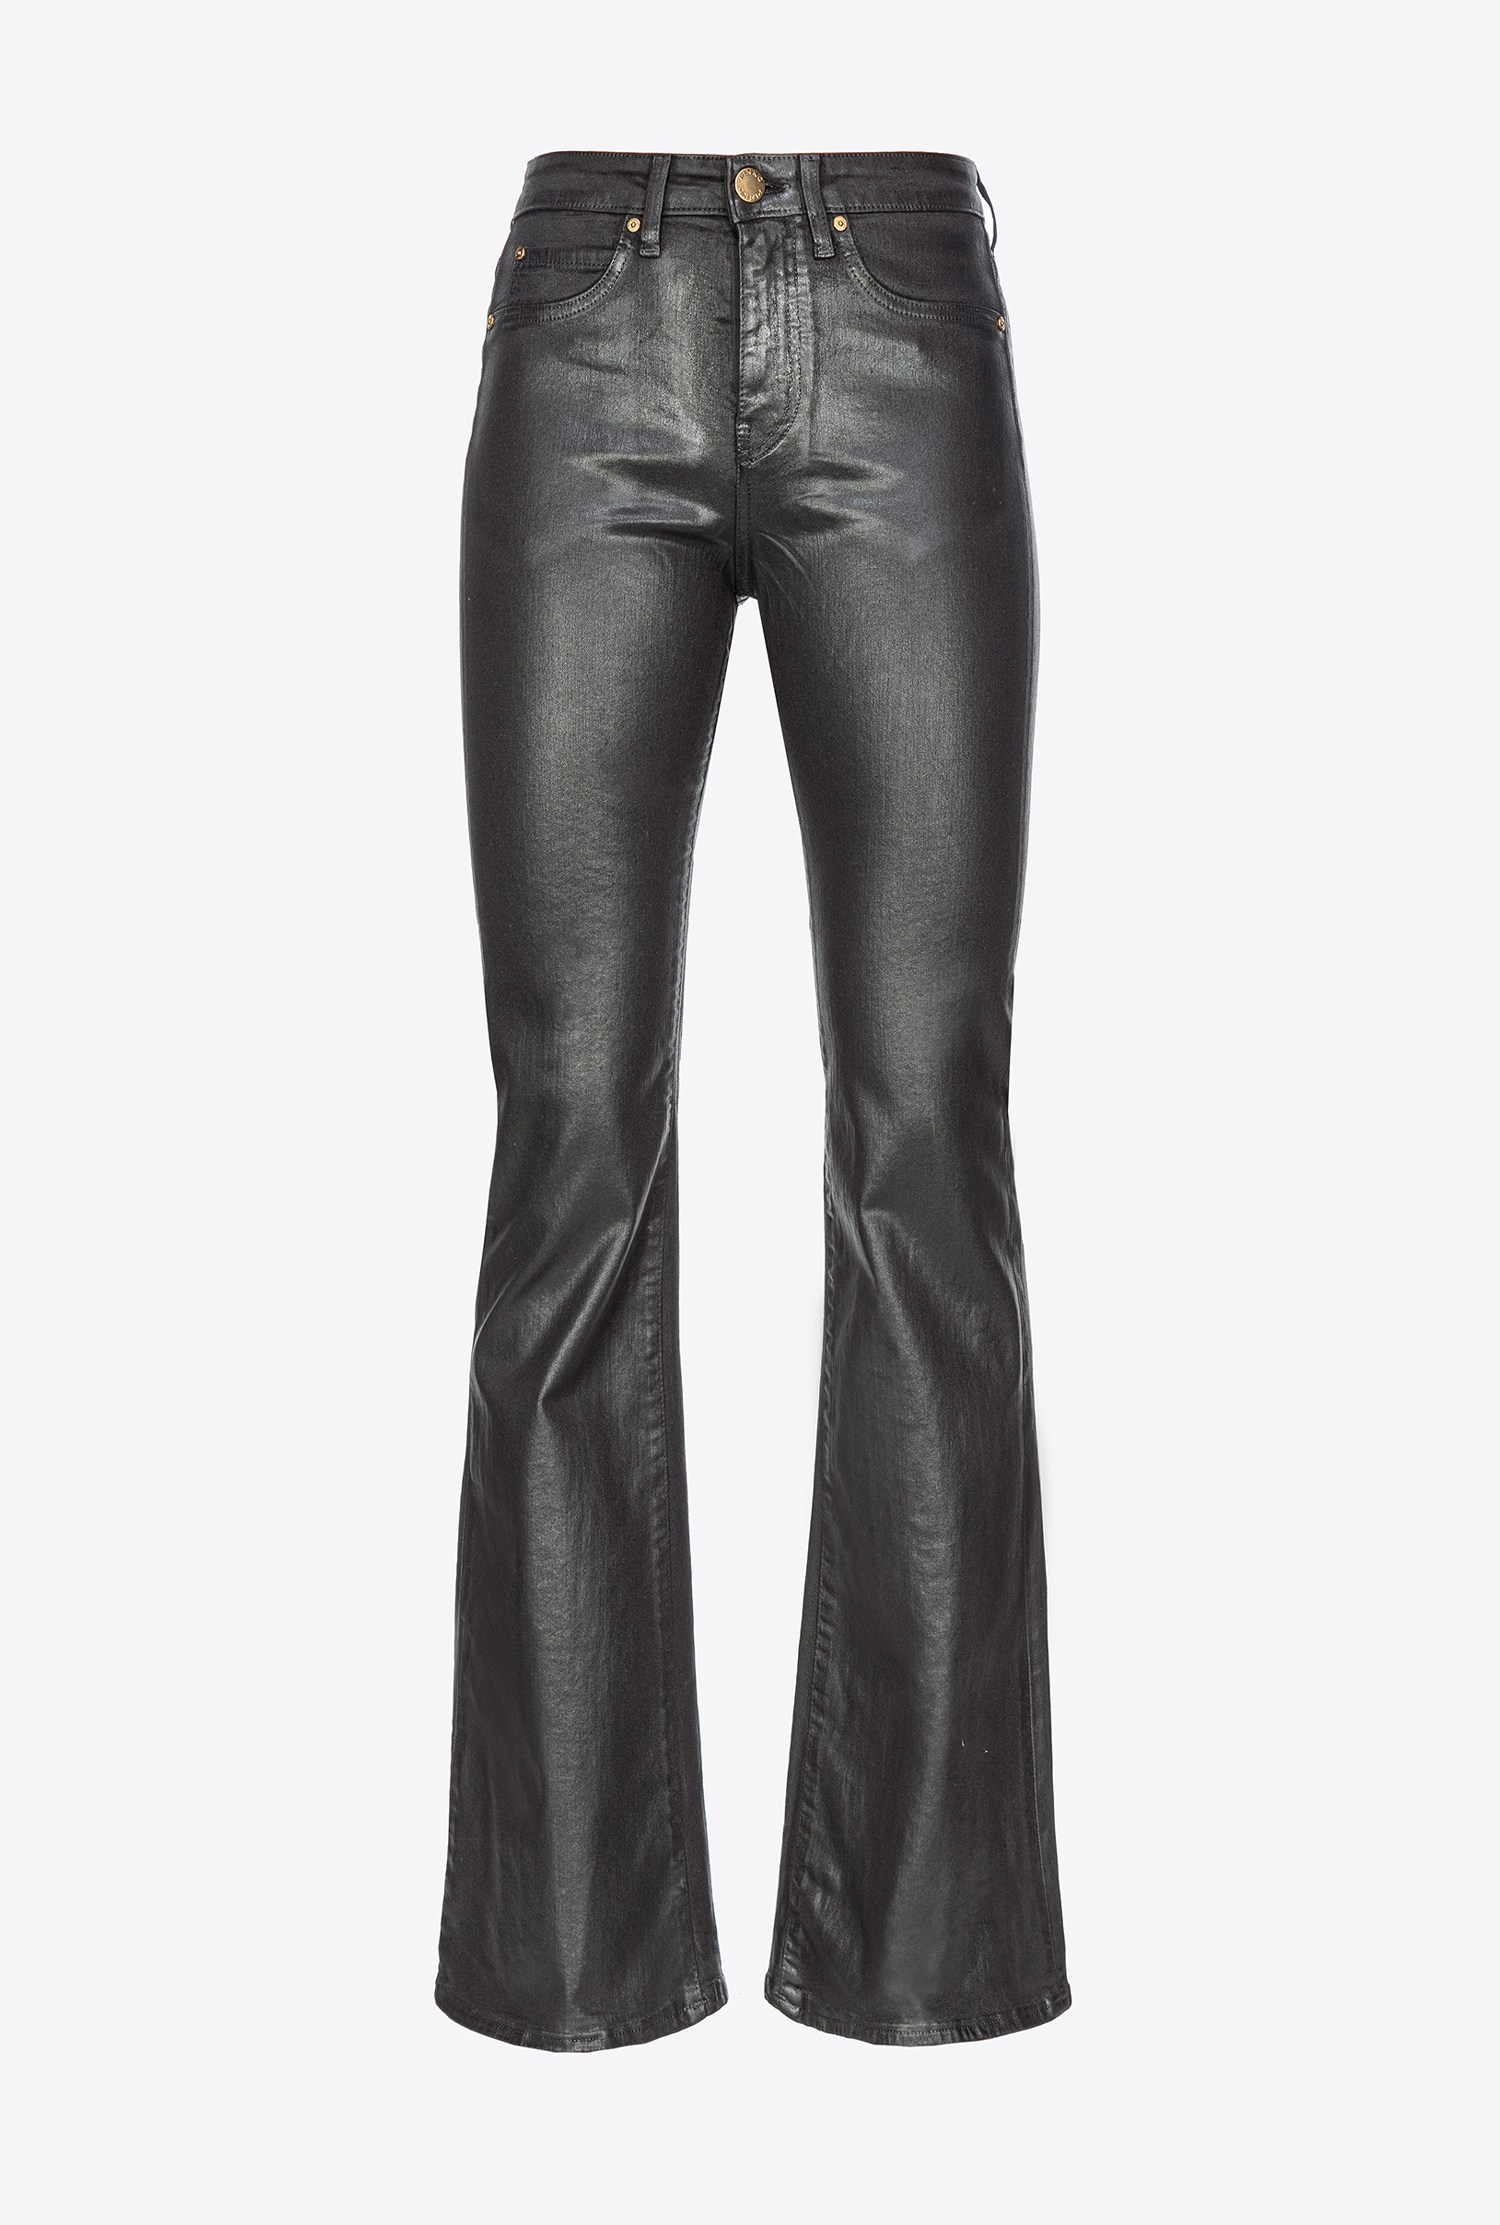 PINKO FLARED LEATHER-LOOK DRILL JEANS